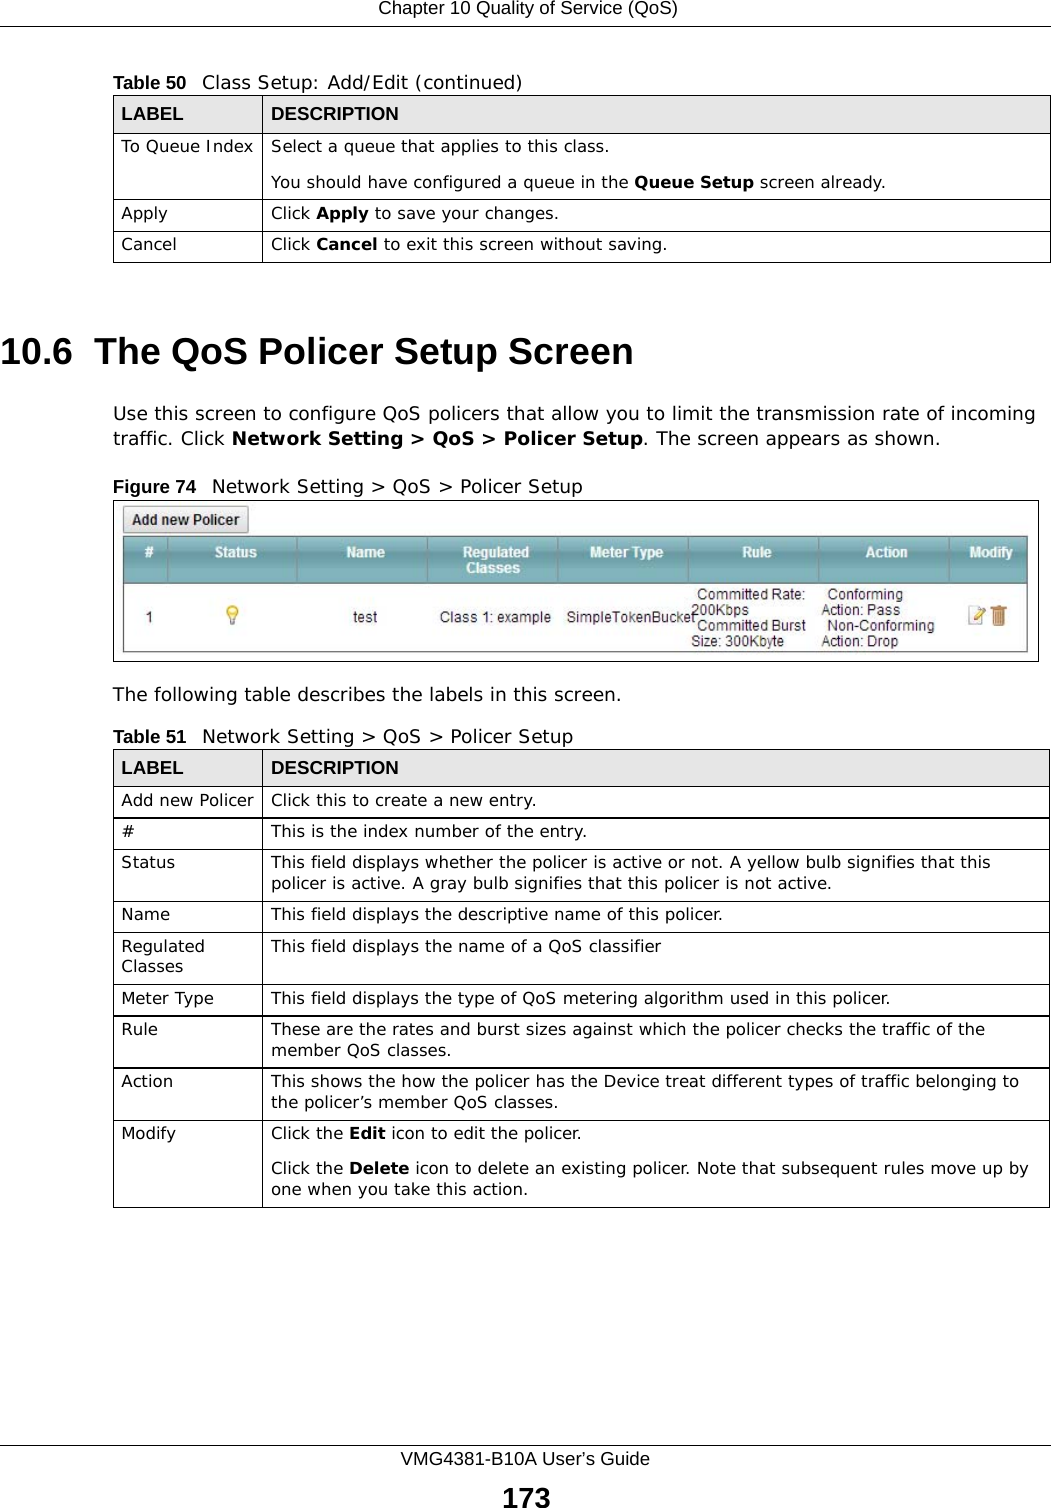  Chapter 10 Quality of Service (QoS)VMG4381-B10A User’s Guide17310.6  The QoS Policer Setup ScreenUse this screen to configure QoS policers that allow you to limit the transmission rate of incoming traffic. Click Network Setting &gt; QoS &gt; Policer Setup. The screen appears as shown. Figure 74   Network Setting &gt; QoS &gt; Policer Setup The following table describes the labels in this screen.  To Queue Index Select a queue that applies to this class.You should have configured a queue in the Queue Setup screen already.Apply Click Apply to save your changes.Cancel Click Cancel to exit this screen without saving.Table 50   Class Setup: Add/Edit (continued)LABEL DESCRIPTIONTable 51   Network Setting &gt; QoS &gt; Policer SetupLABEL DESCRIPTIONAdd new Policer Click this to create a new entry.#This is the index number of the entry.Status This field displays whether the policer is active or not. A yellow bulb signifies that this policer is active. A gray bulb signifies that this policer is not active.Name This field displays the descriptive name of this policer.Regulated Classes This field displays the name of a QoS classifierMeter Type This field displays the type of QoS metering algorithm used in this policer.Rule These are the rates and burst sizes against which the policer checks the traffic of the member QoS classes.Action This shows the how the policer has the Device treat different types of traffic belonging to the policer’s member QoS classes.Modify Click the Edit icon to edit the policer.Click the Delete icon to delete an existing policer. Note that subsequent rules move up by one when you take this action.